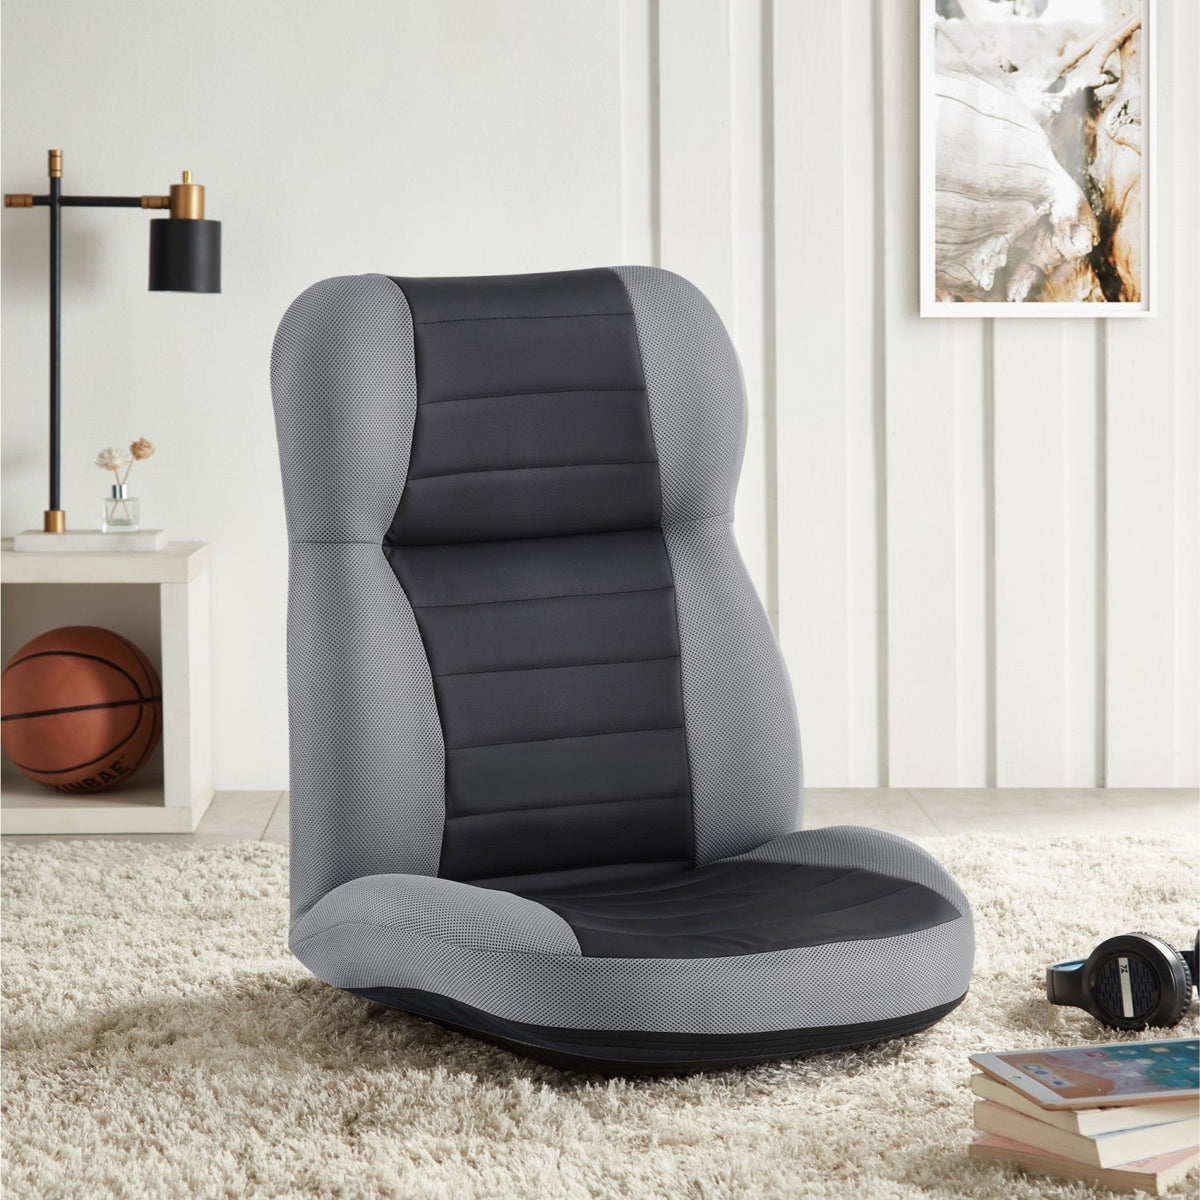 Kaleah Modern Chair 5 Adjustable Back Positions, 3 Headrest Positions  Reclines to Flat for Game Room - Loungie Living